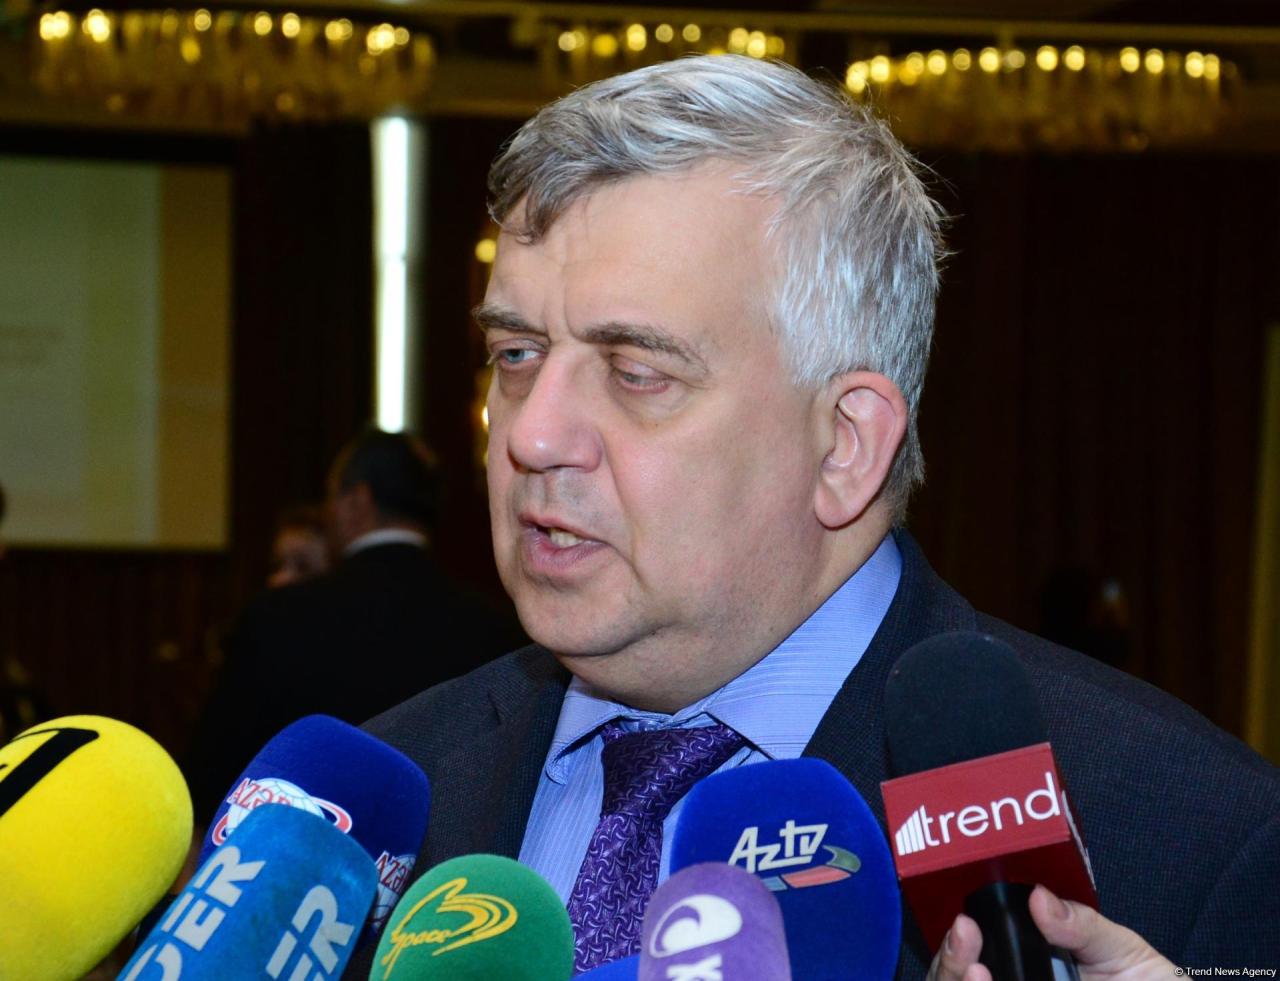 Russian analyst: Armenia turning into country of absurdity